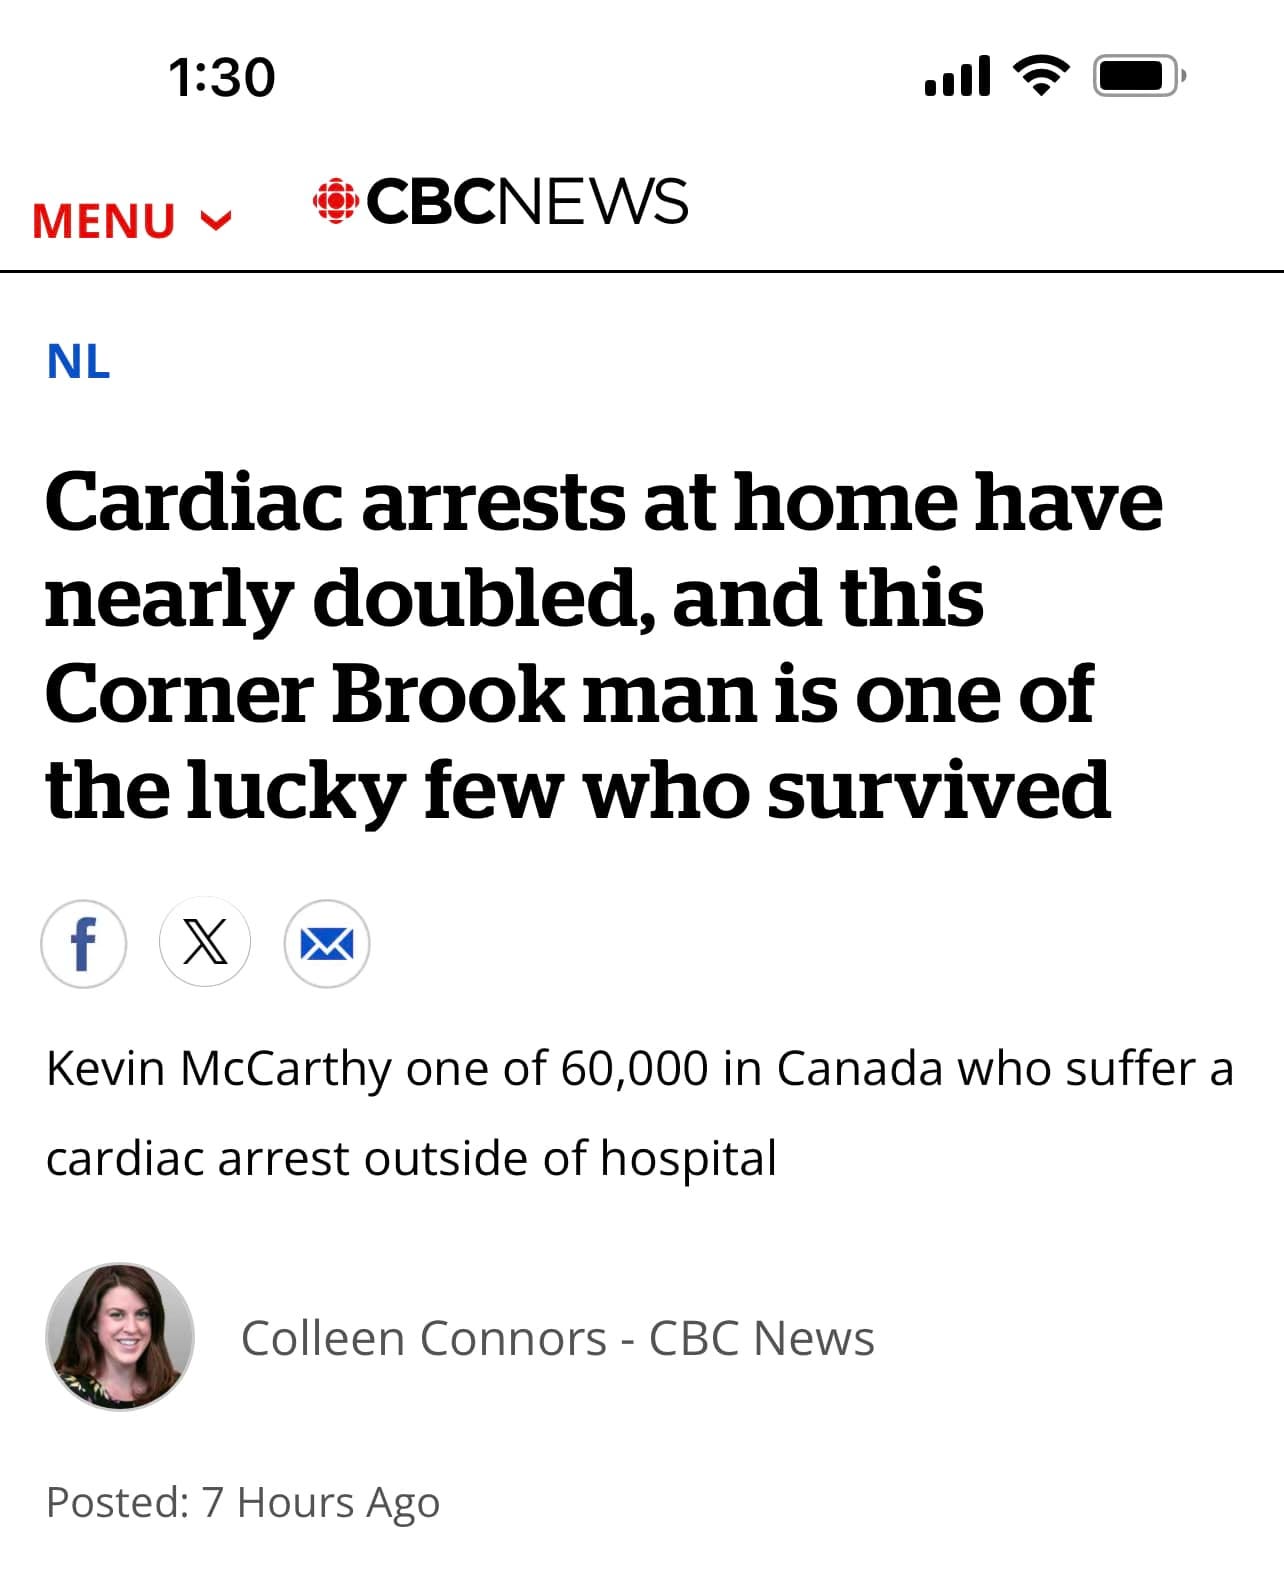 May be an image of 1 person and text that says "1:30 MENU CBCNEWS NL Cardiac arrests at home have nearly doubled, and this Corner Brook man is one of the lucky few who survived f Kevin McCarthy one of 60,000 in Canada who suffer a cardiac arrest outside of hospital Colleen Connors -CBC News Posted: 7 Hours Ago"